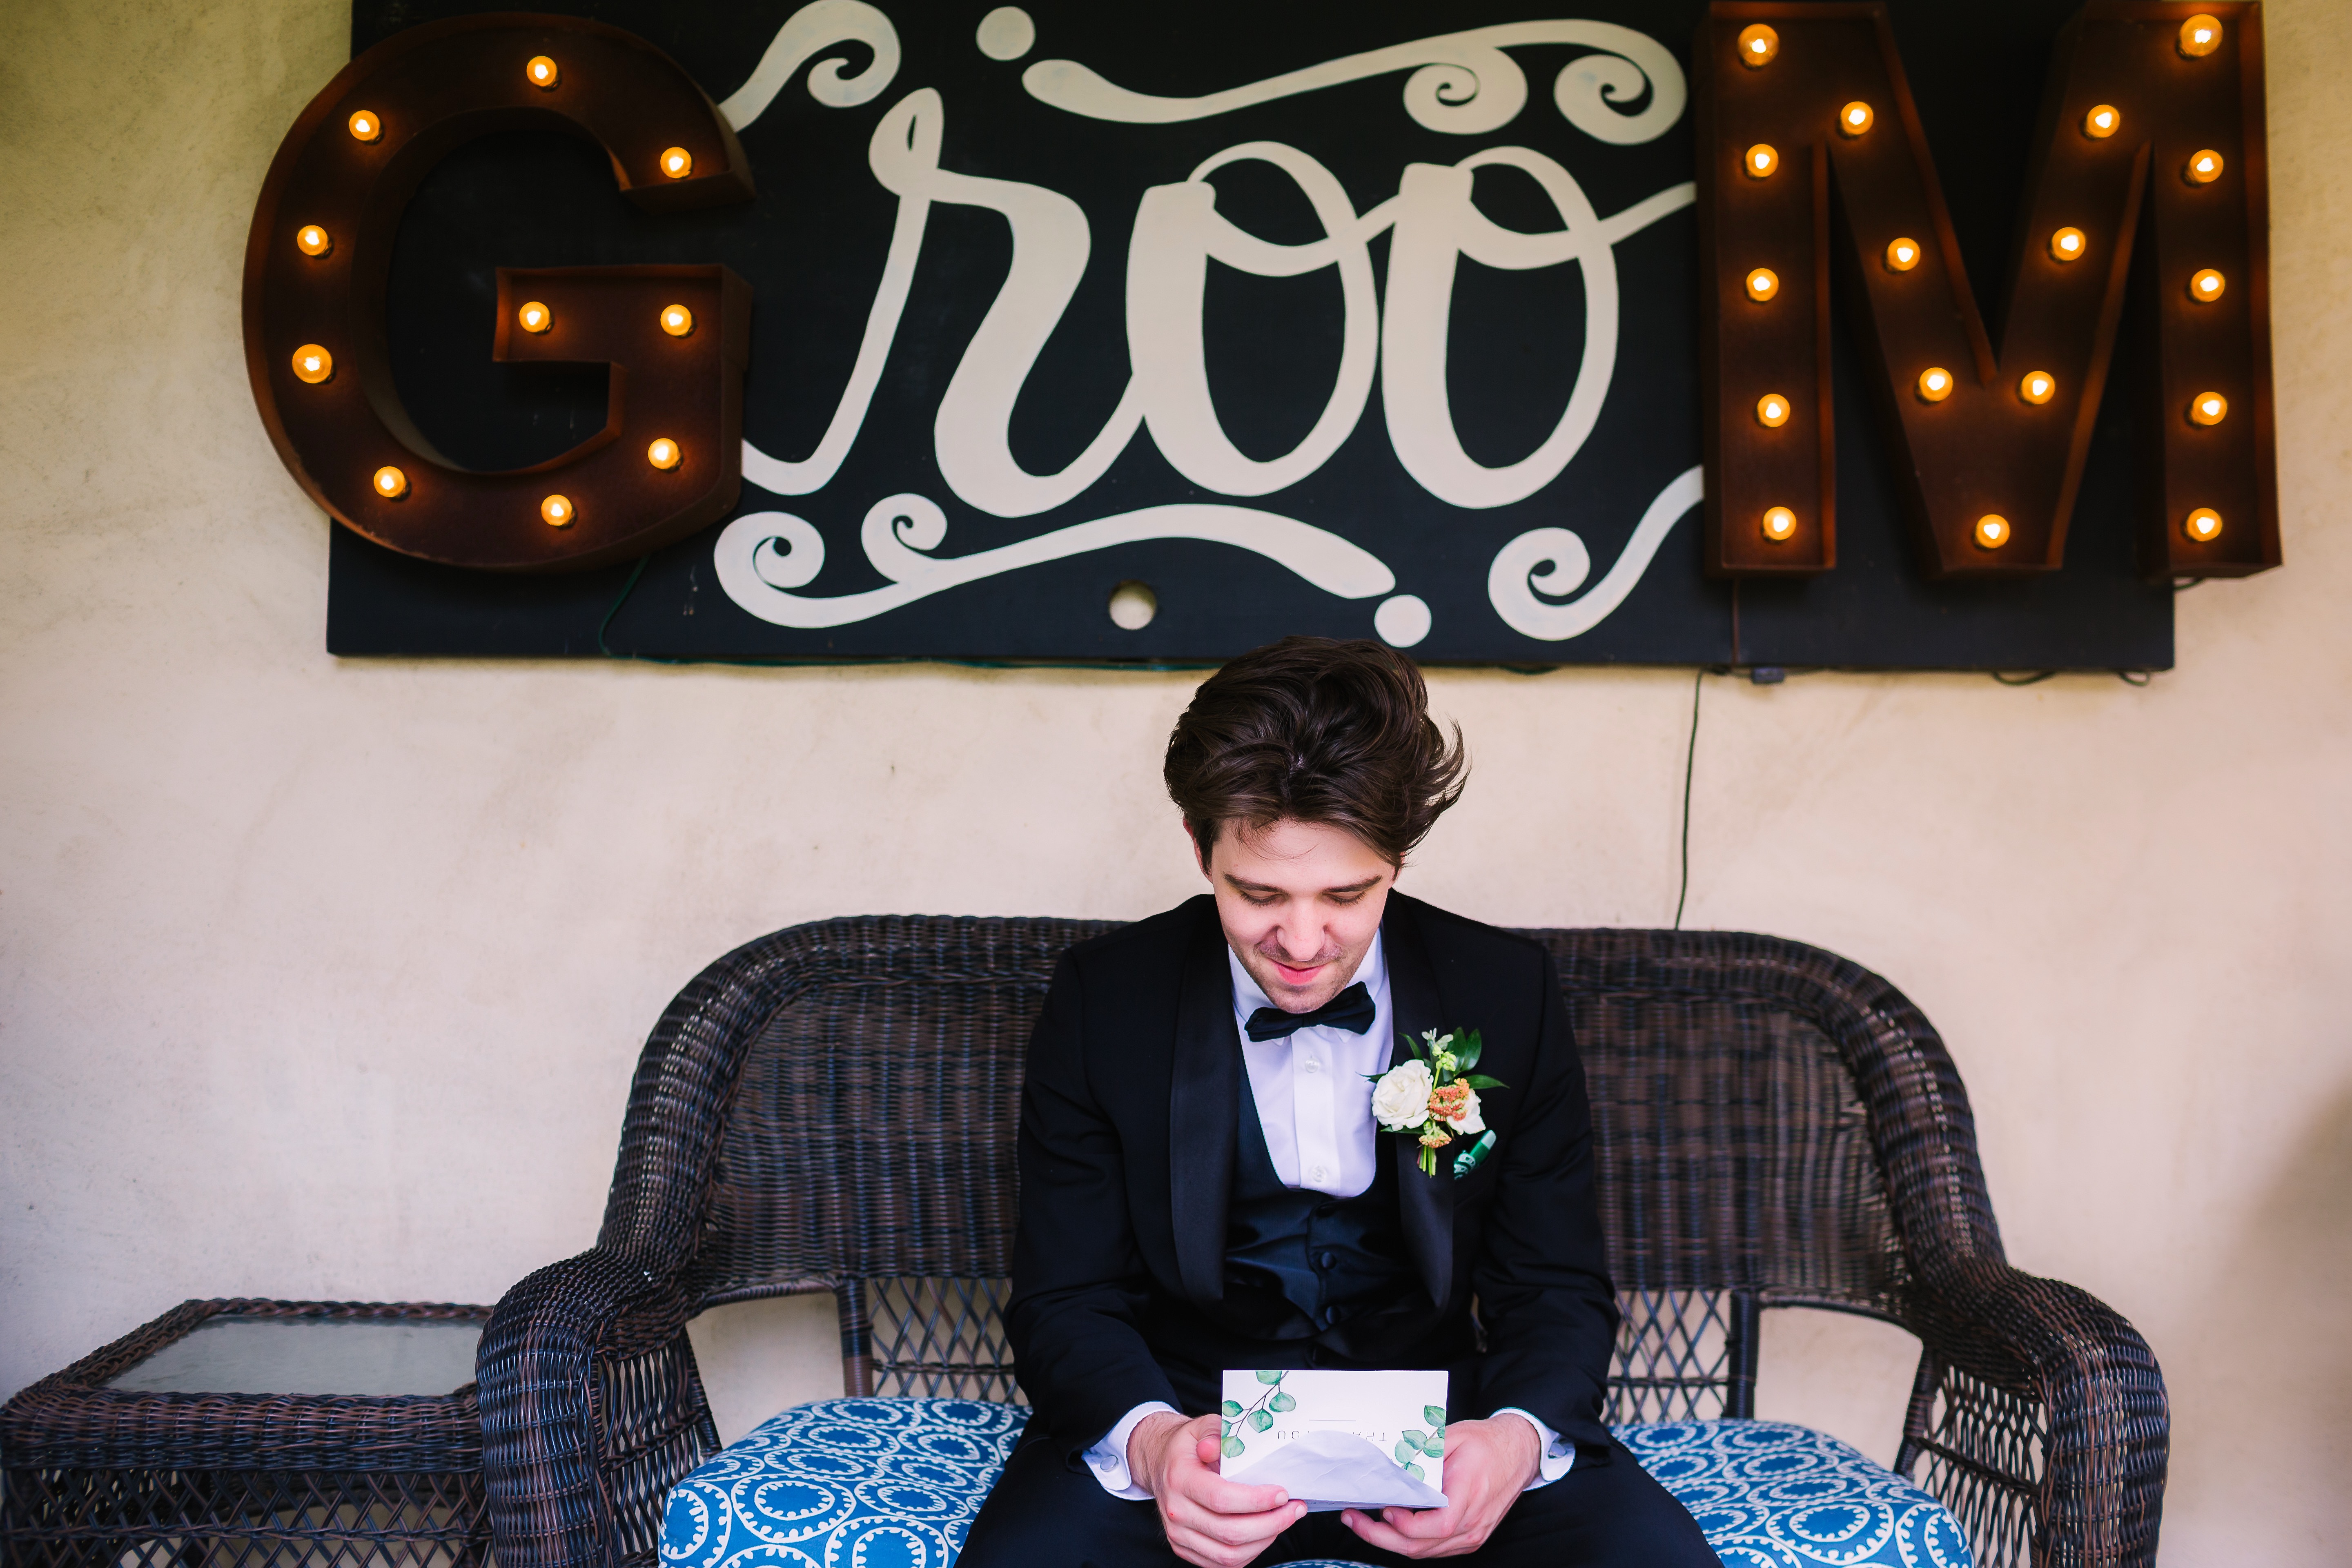 goom-letter-in-fron-t-of-grooms-sign